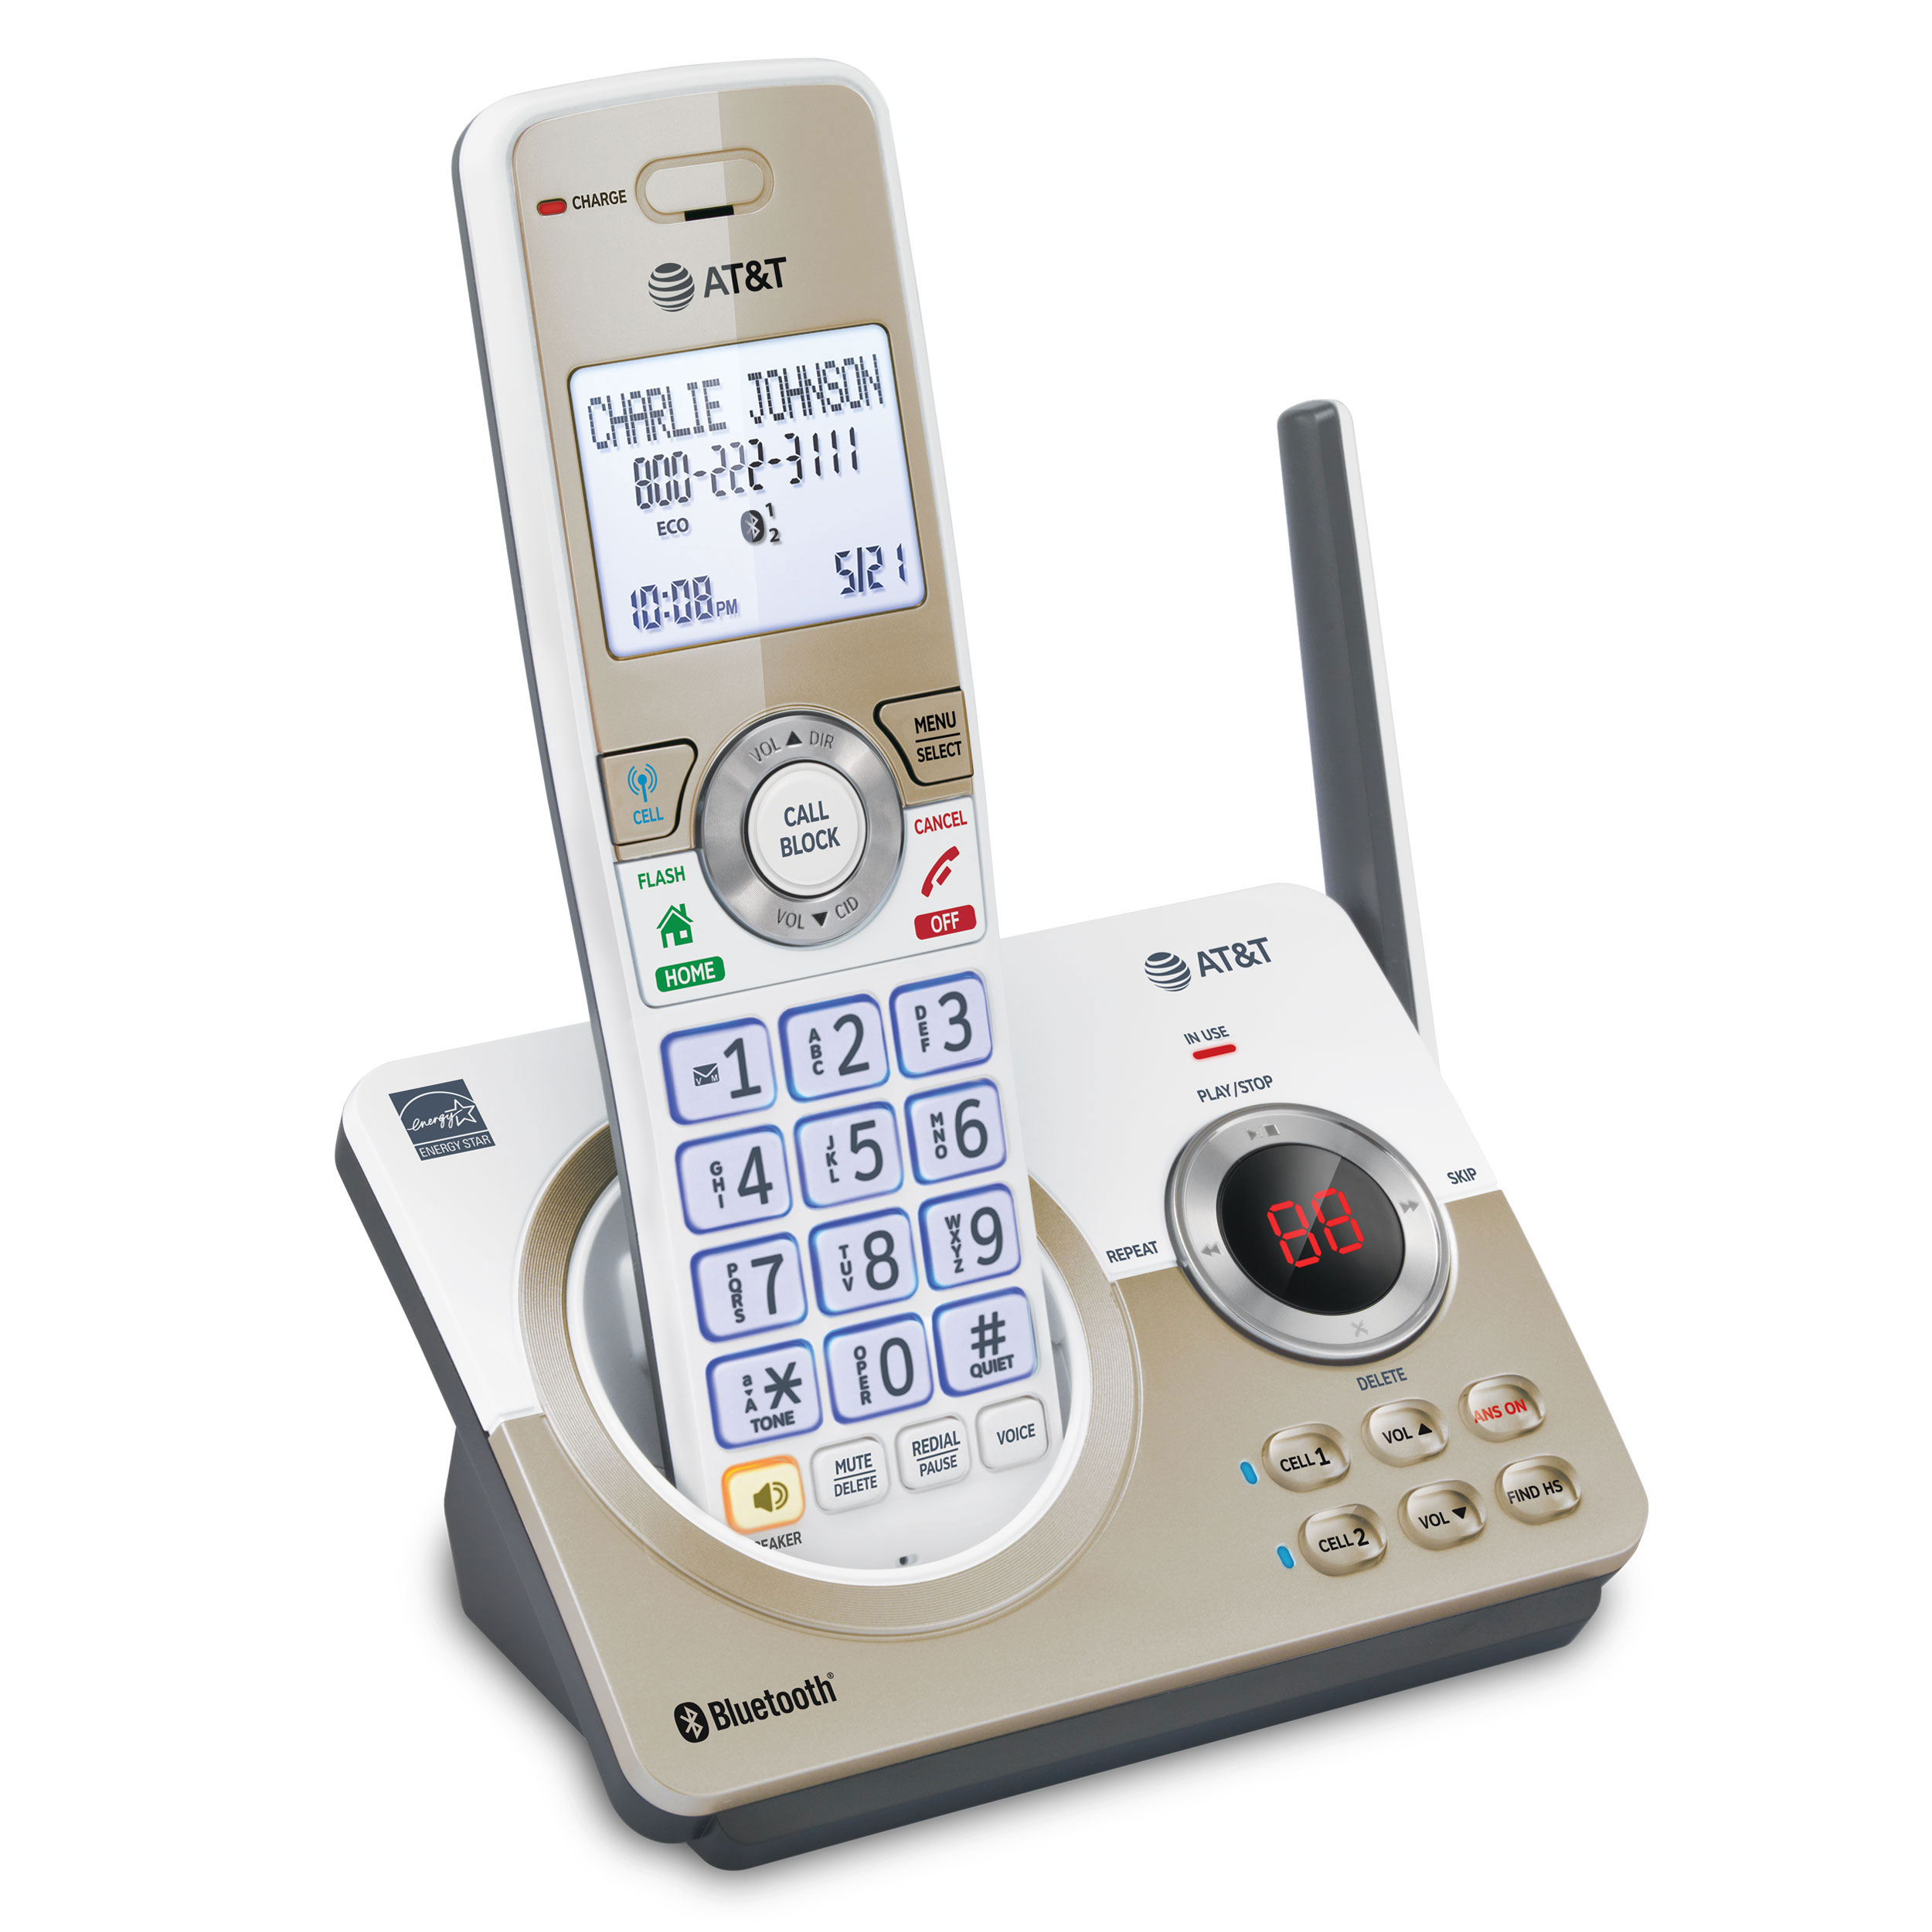 5-Handset Expandable Cordless Phone with Unsurpassed Range, Bluetooth Connect to Cell™, Smart Call Blocker and Answering System - view 2